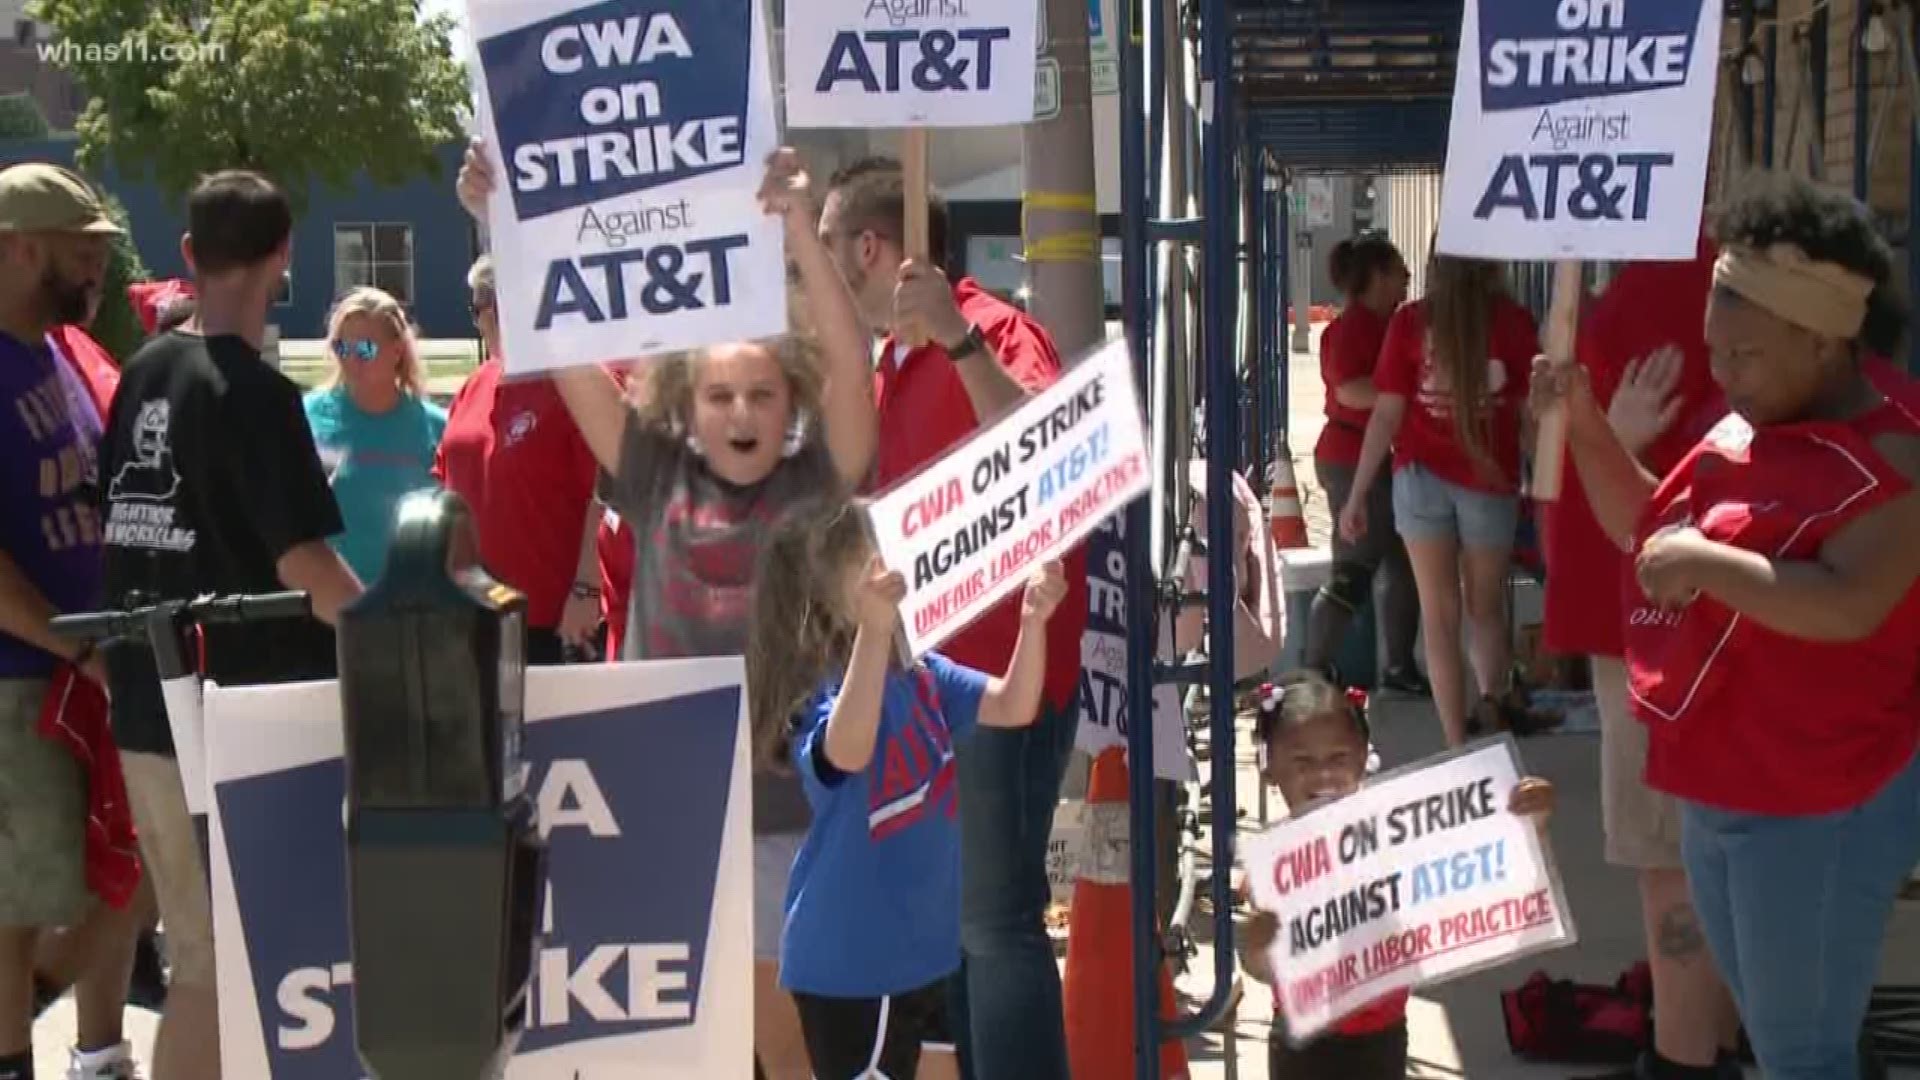 Workers said they were striking due to unfair labor practices. The strike started on August 24 and ended on August 28.